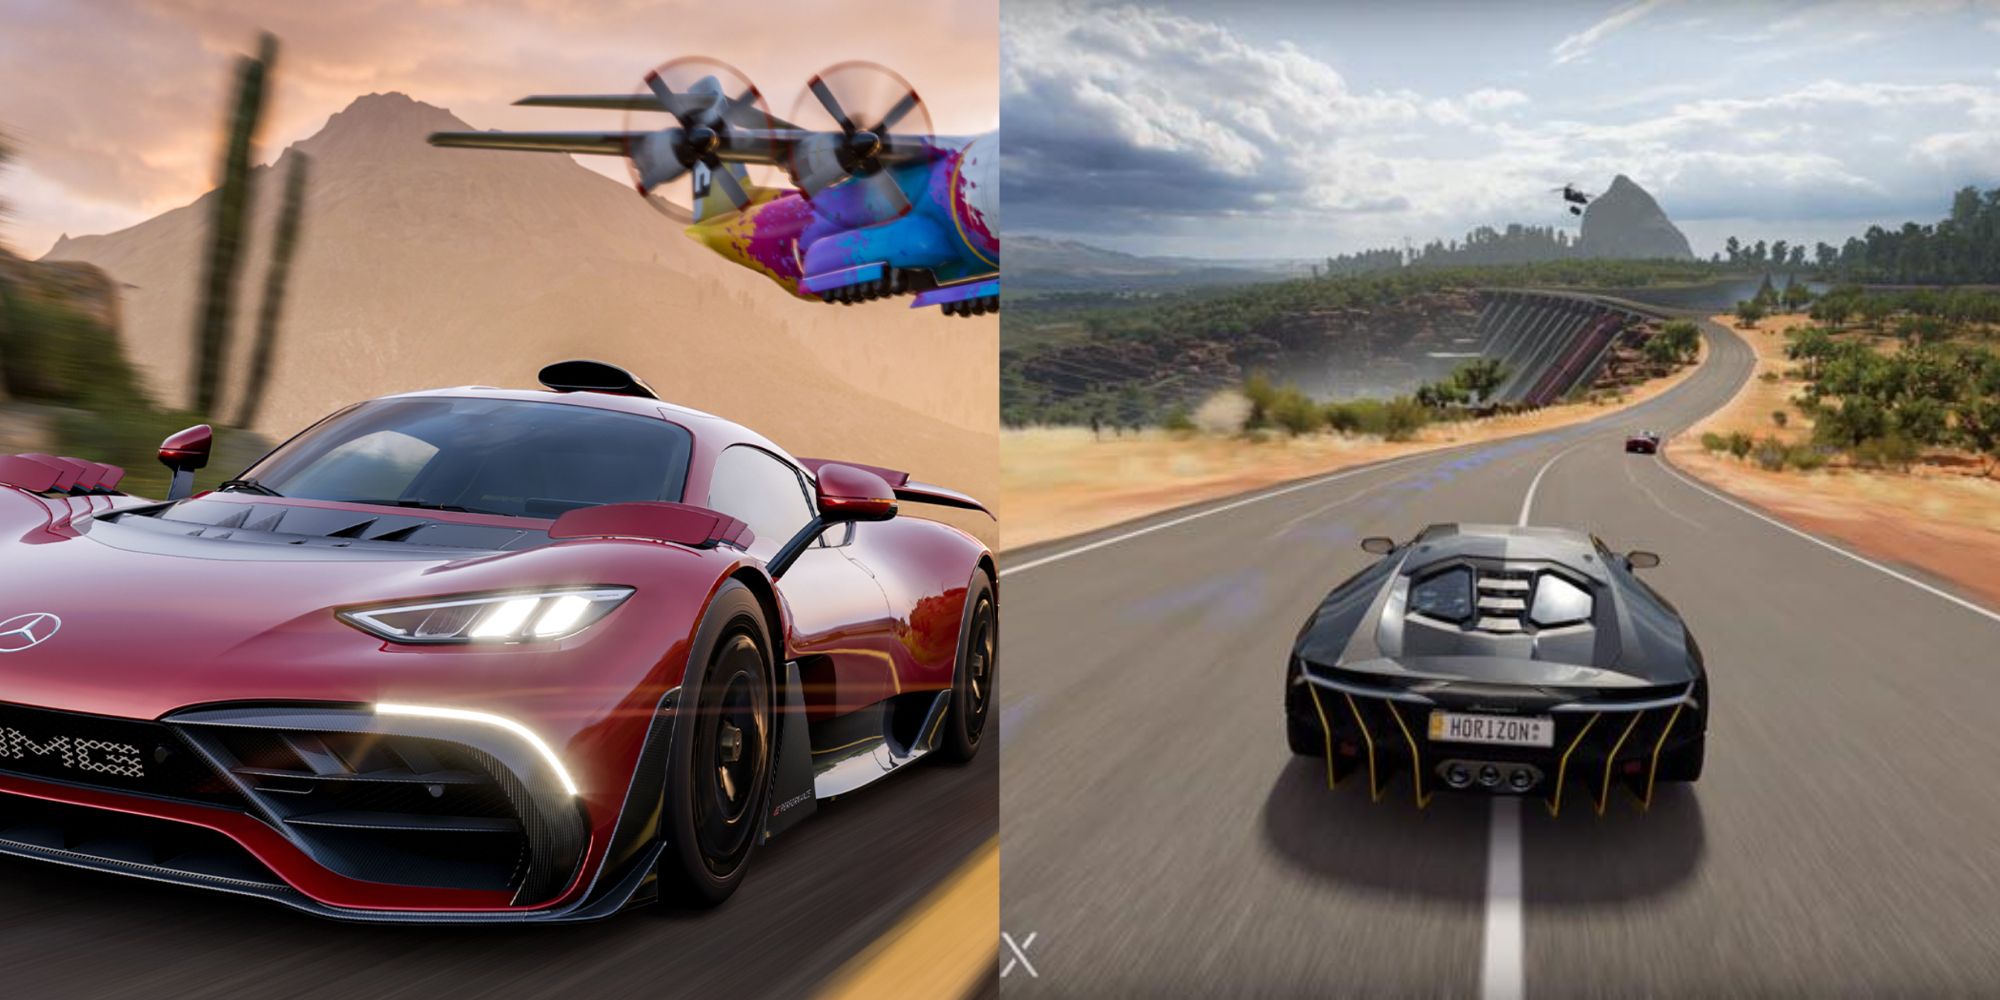 The 20 best driving games of the last decade: 10-1